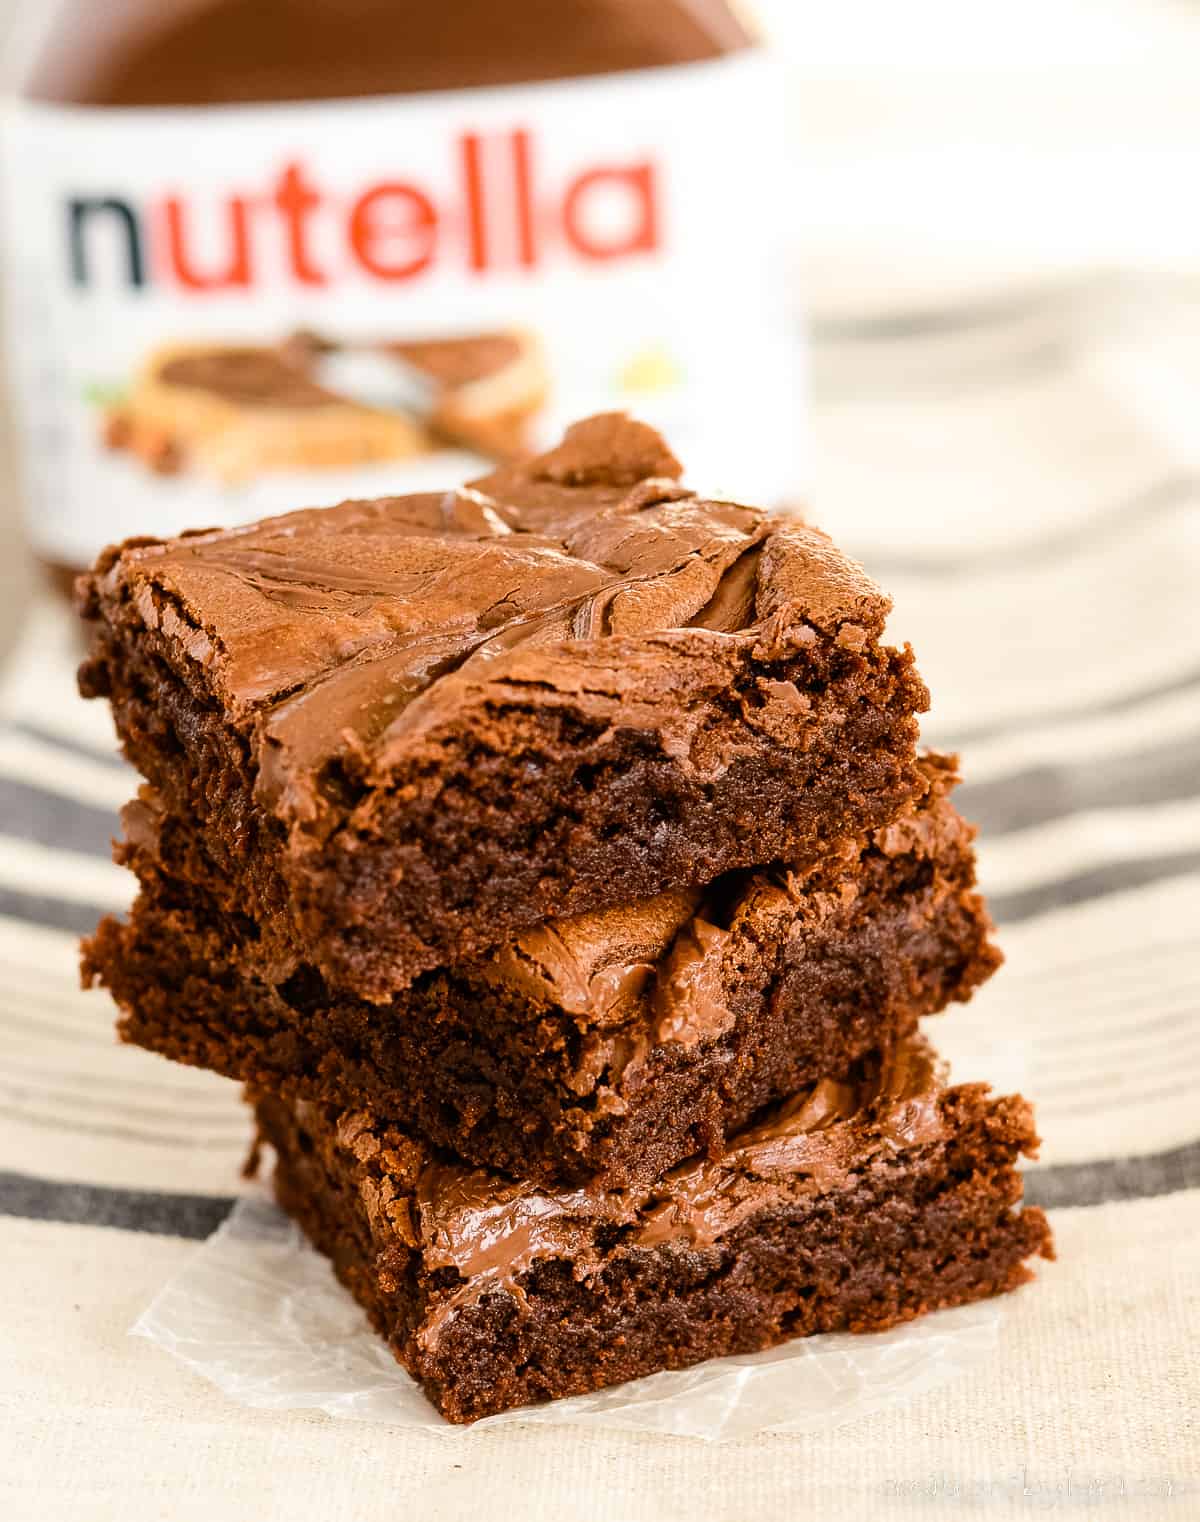 stack of nutella brownies with a jar of chocolate hazelnut spread in the background